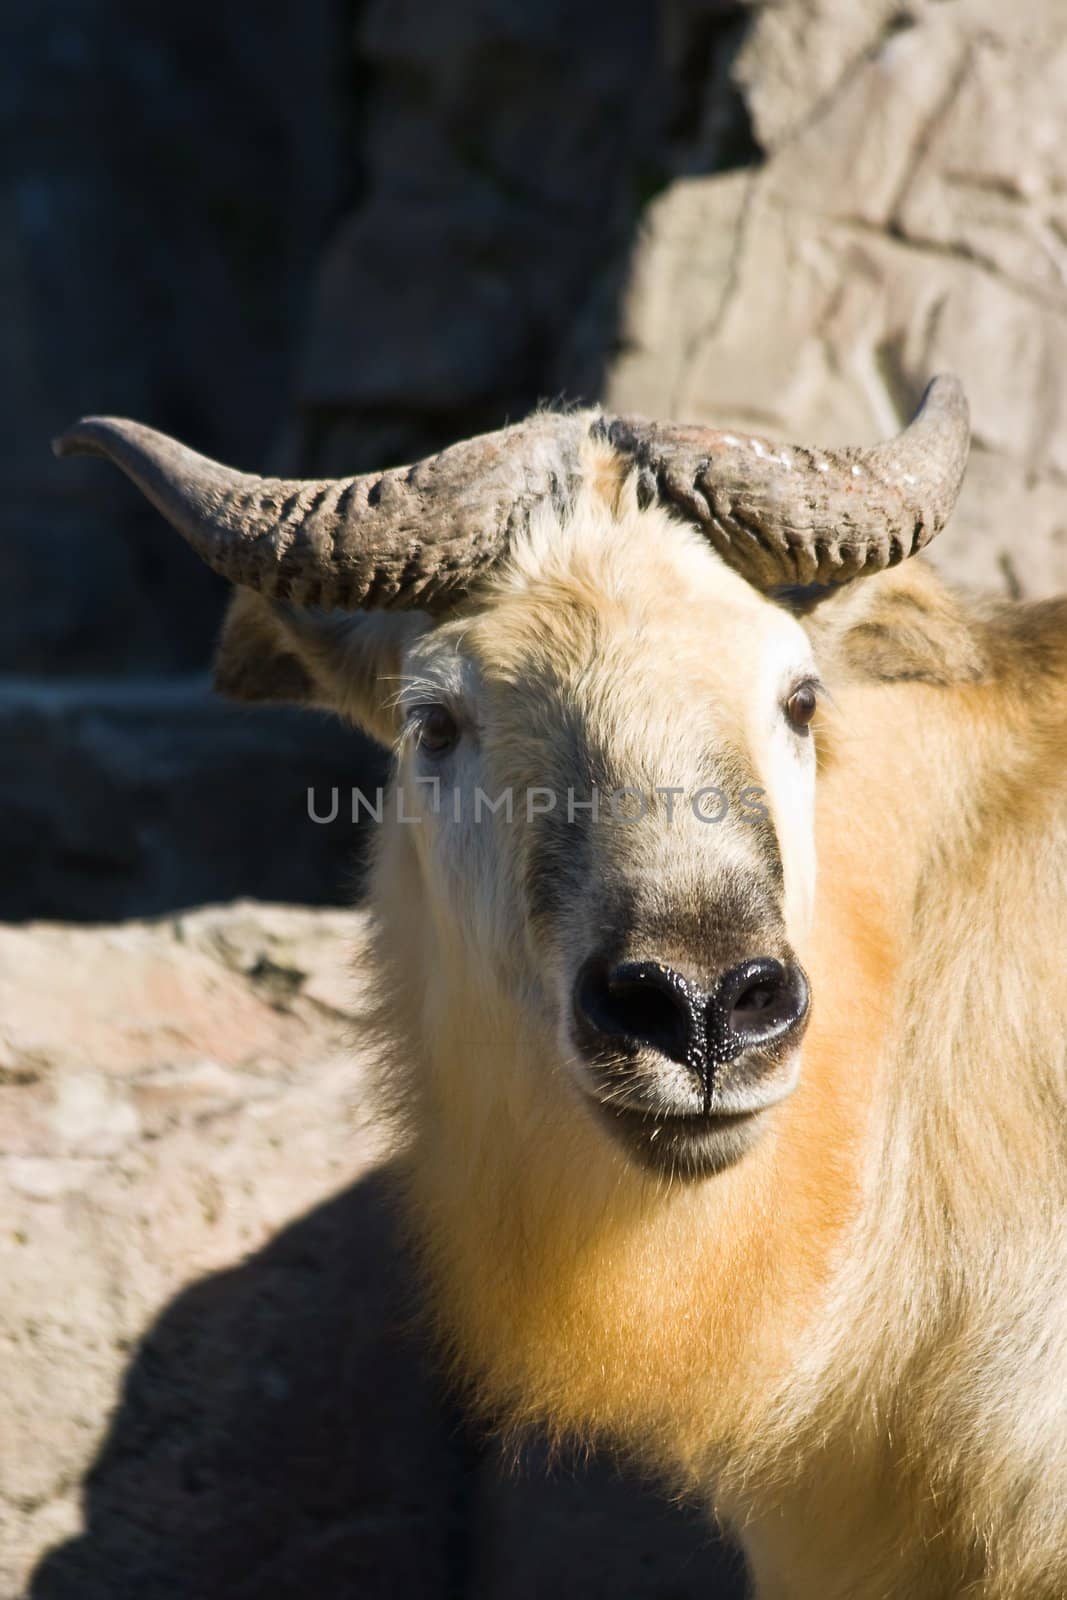 Tibetan takin or Sichuantakin is a goat-antelope, living in forests of the Himalayas.
The takin is national symbol of Bhutan